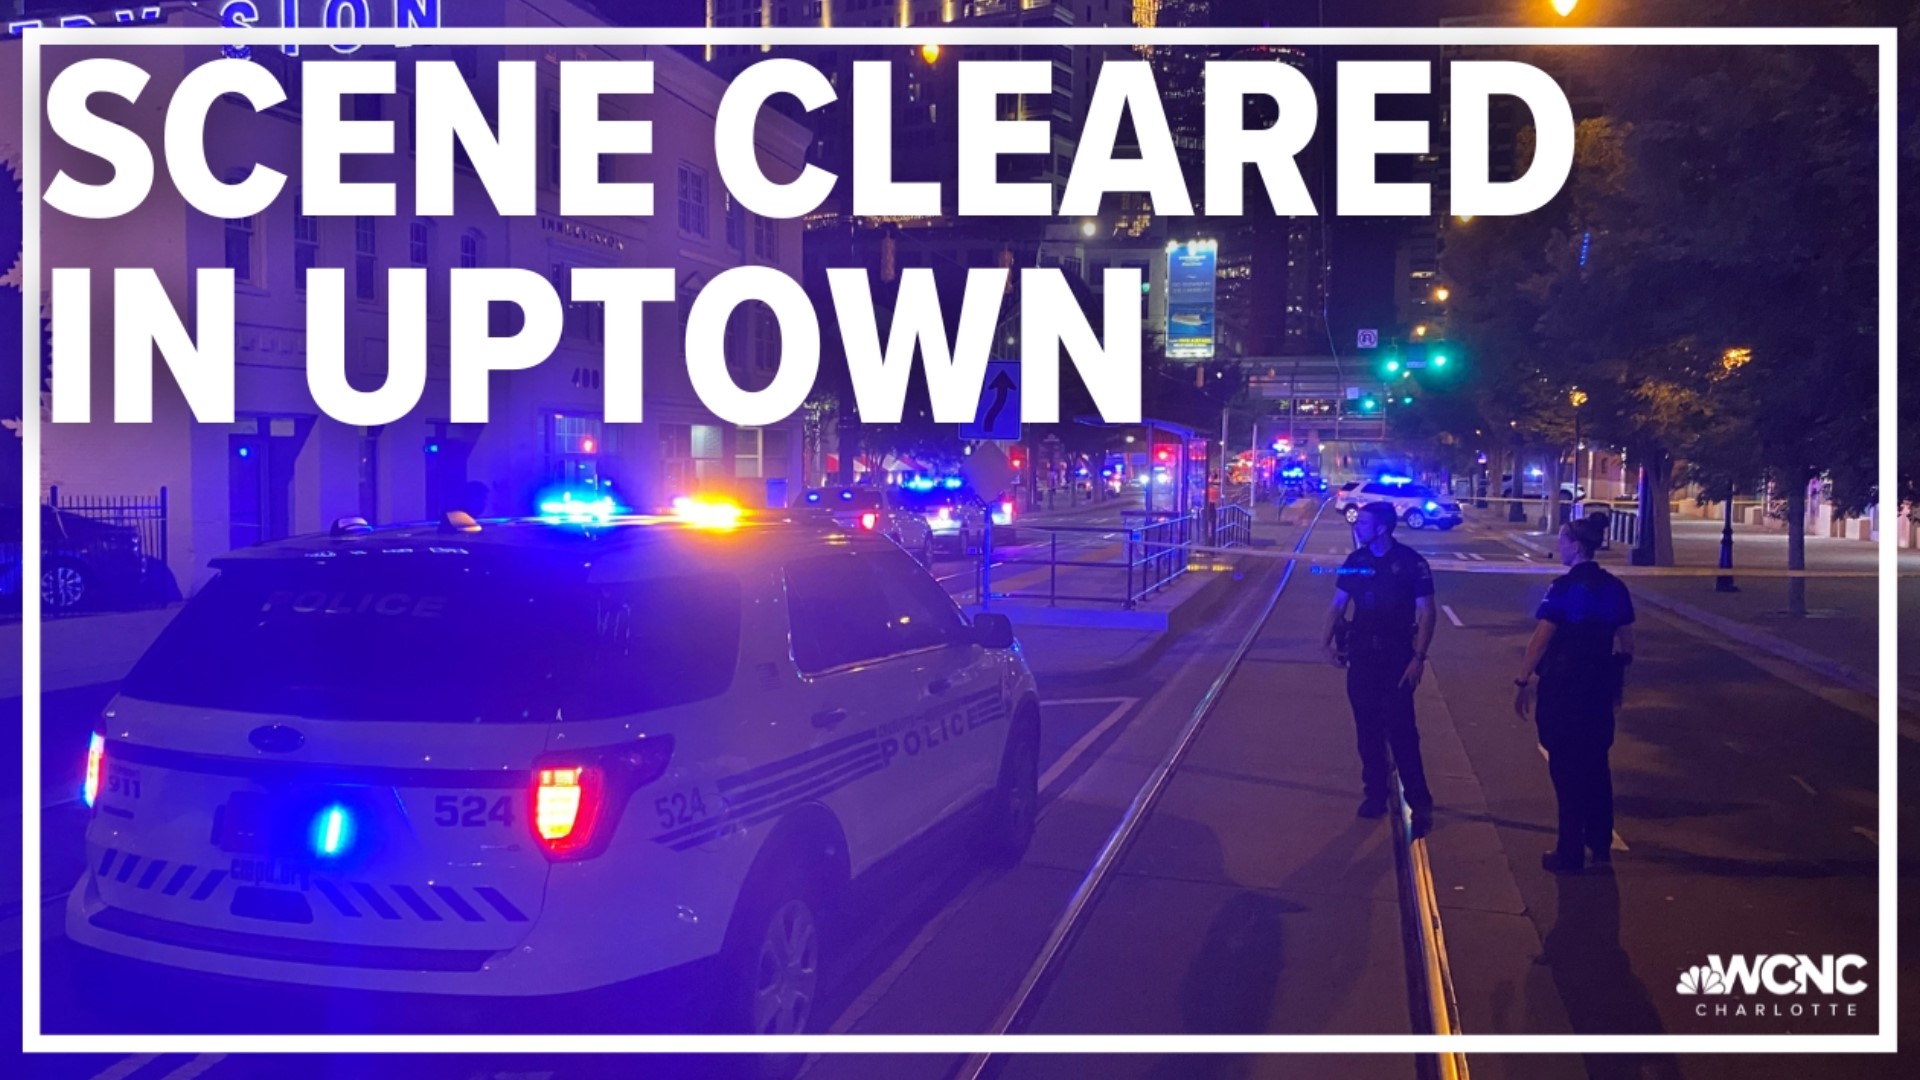 People were urged to avoid the area during the investigation, but CMPD said roads have since reopened.